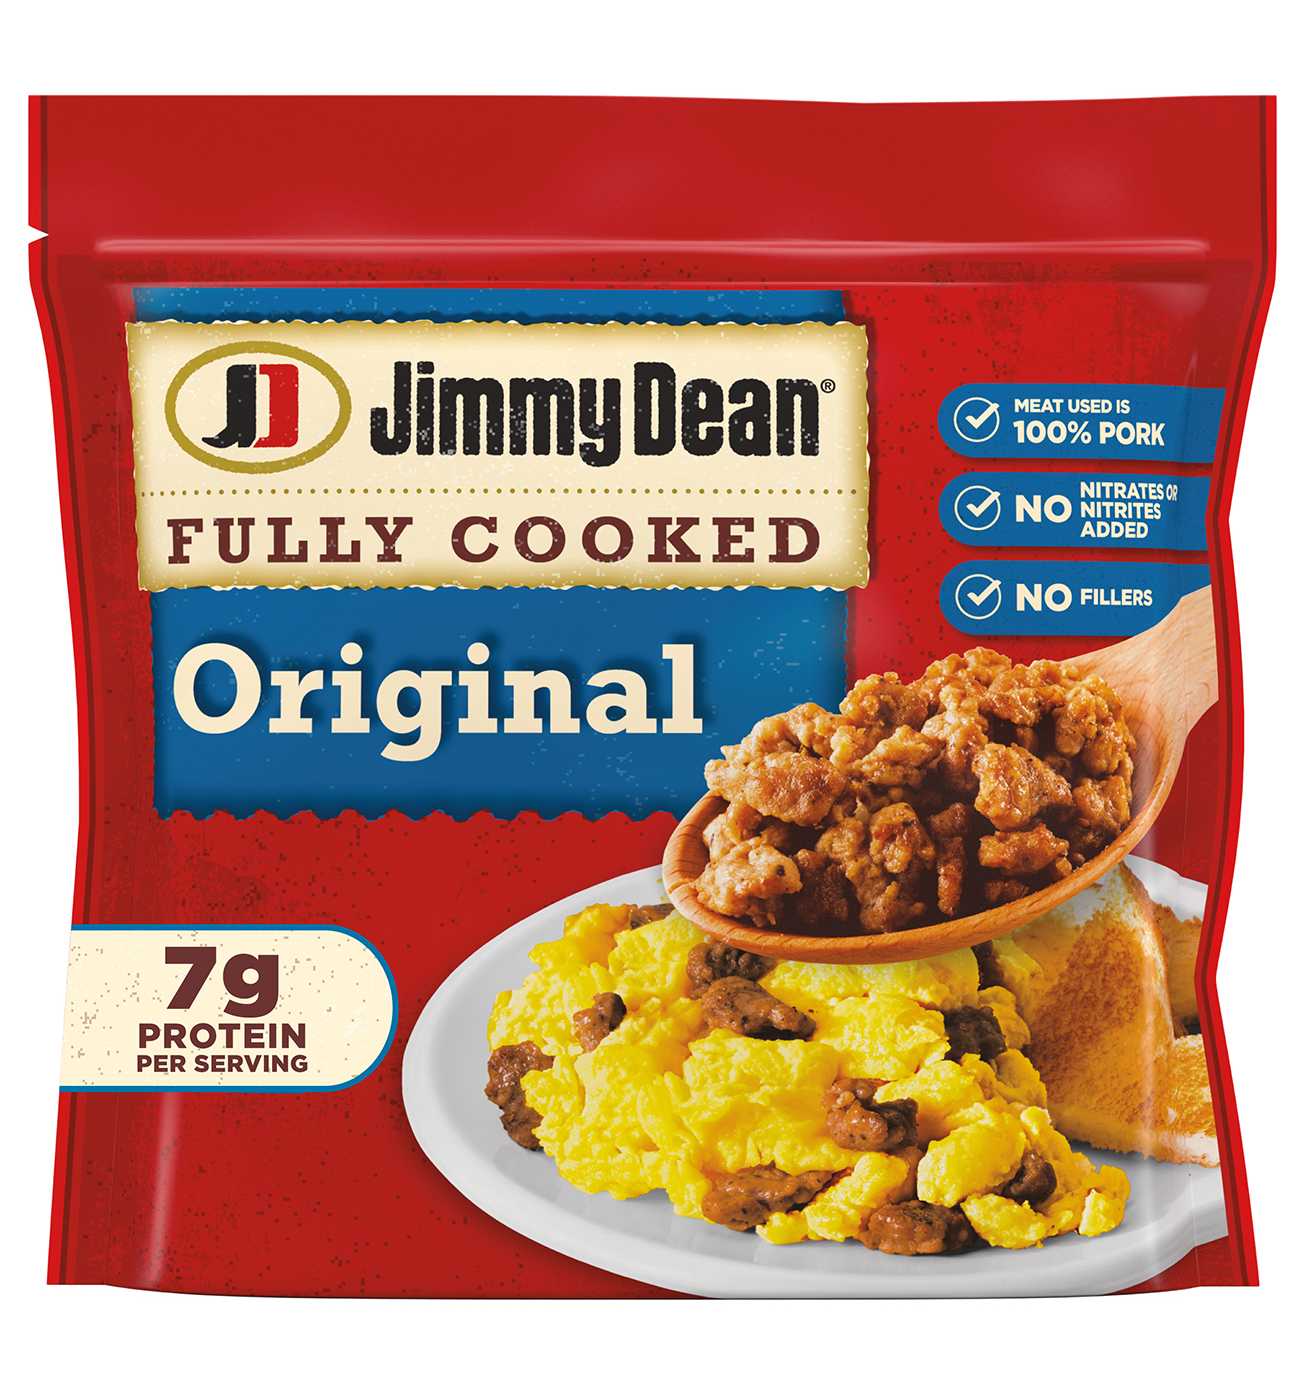 Jimmy Dean Fully Cooked Pork Sausage Crumbles - Original; image 1 of 2